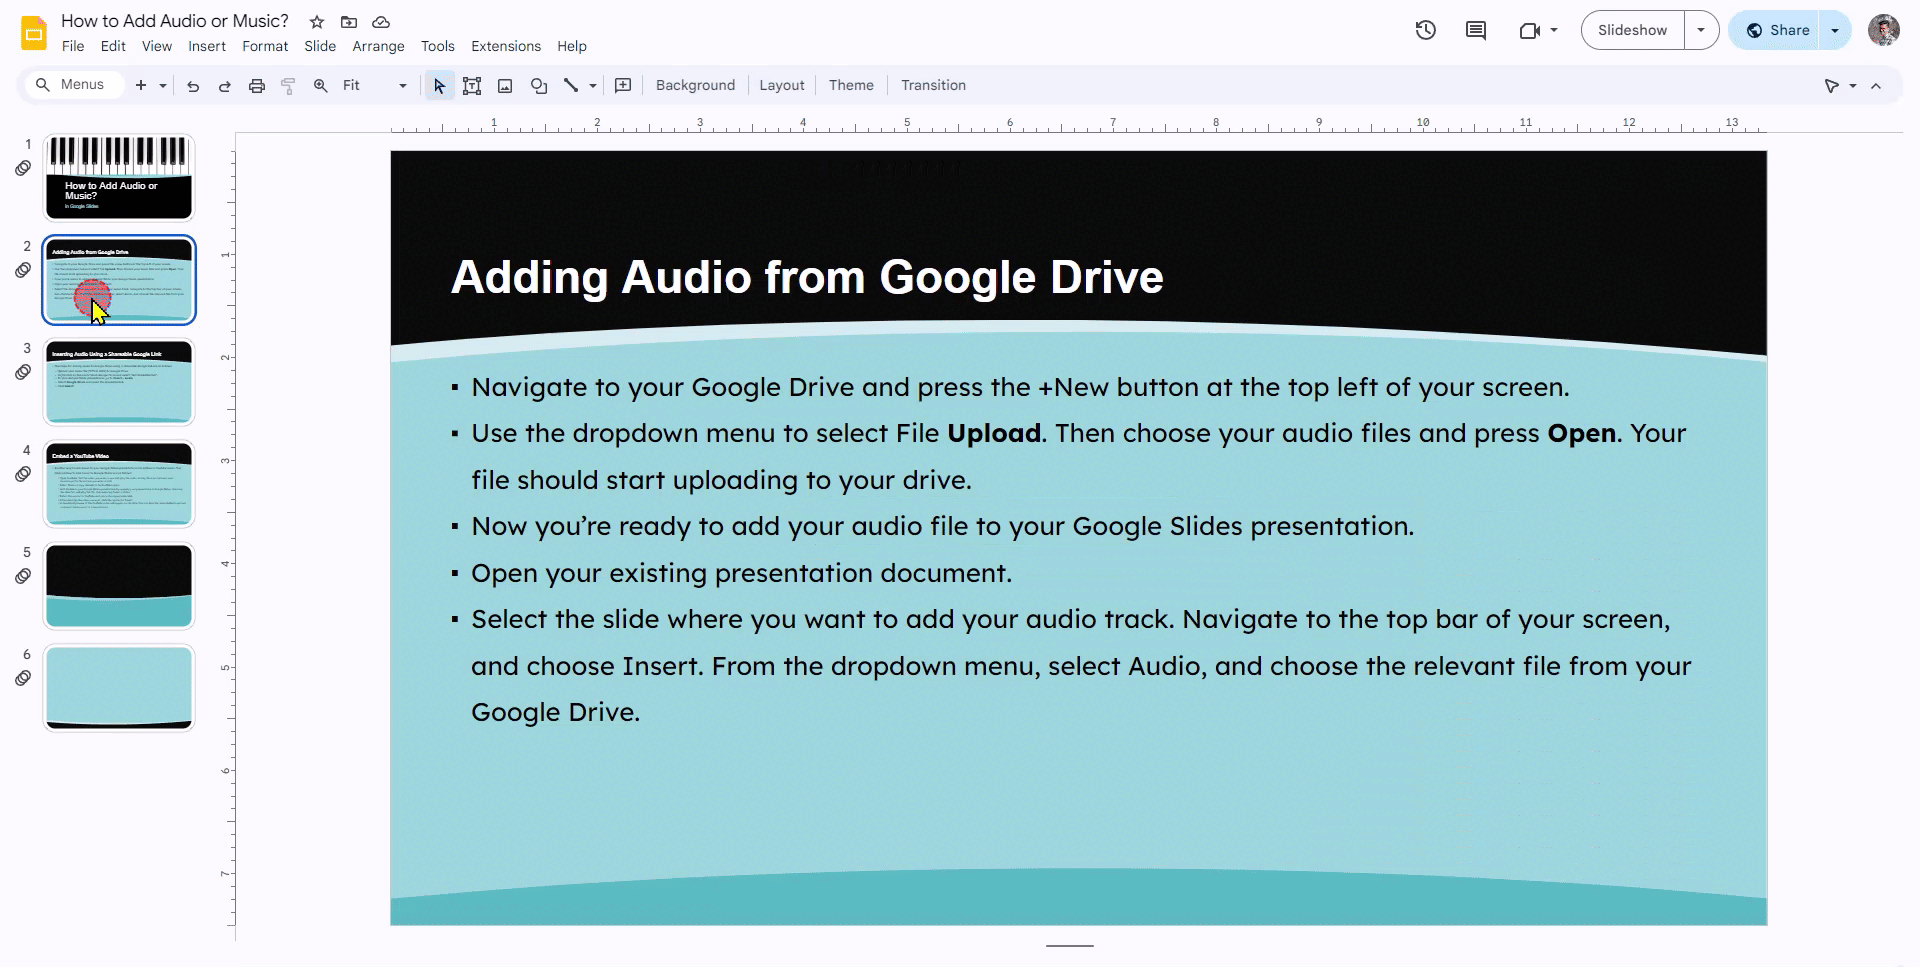 Adding Audio from Google Drive